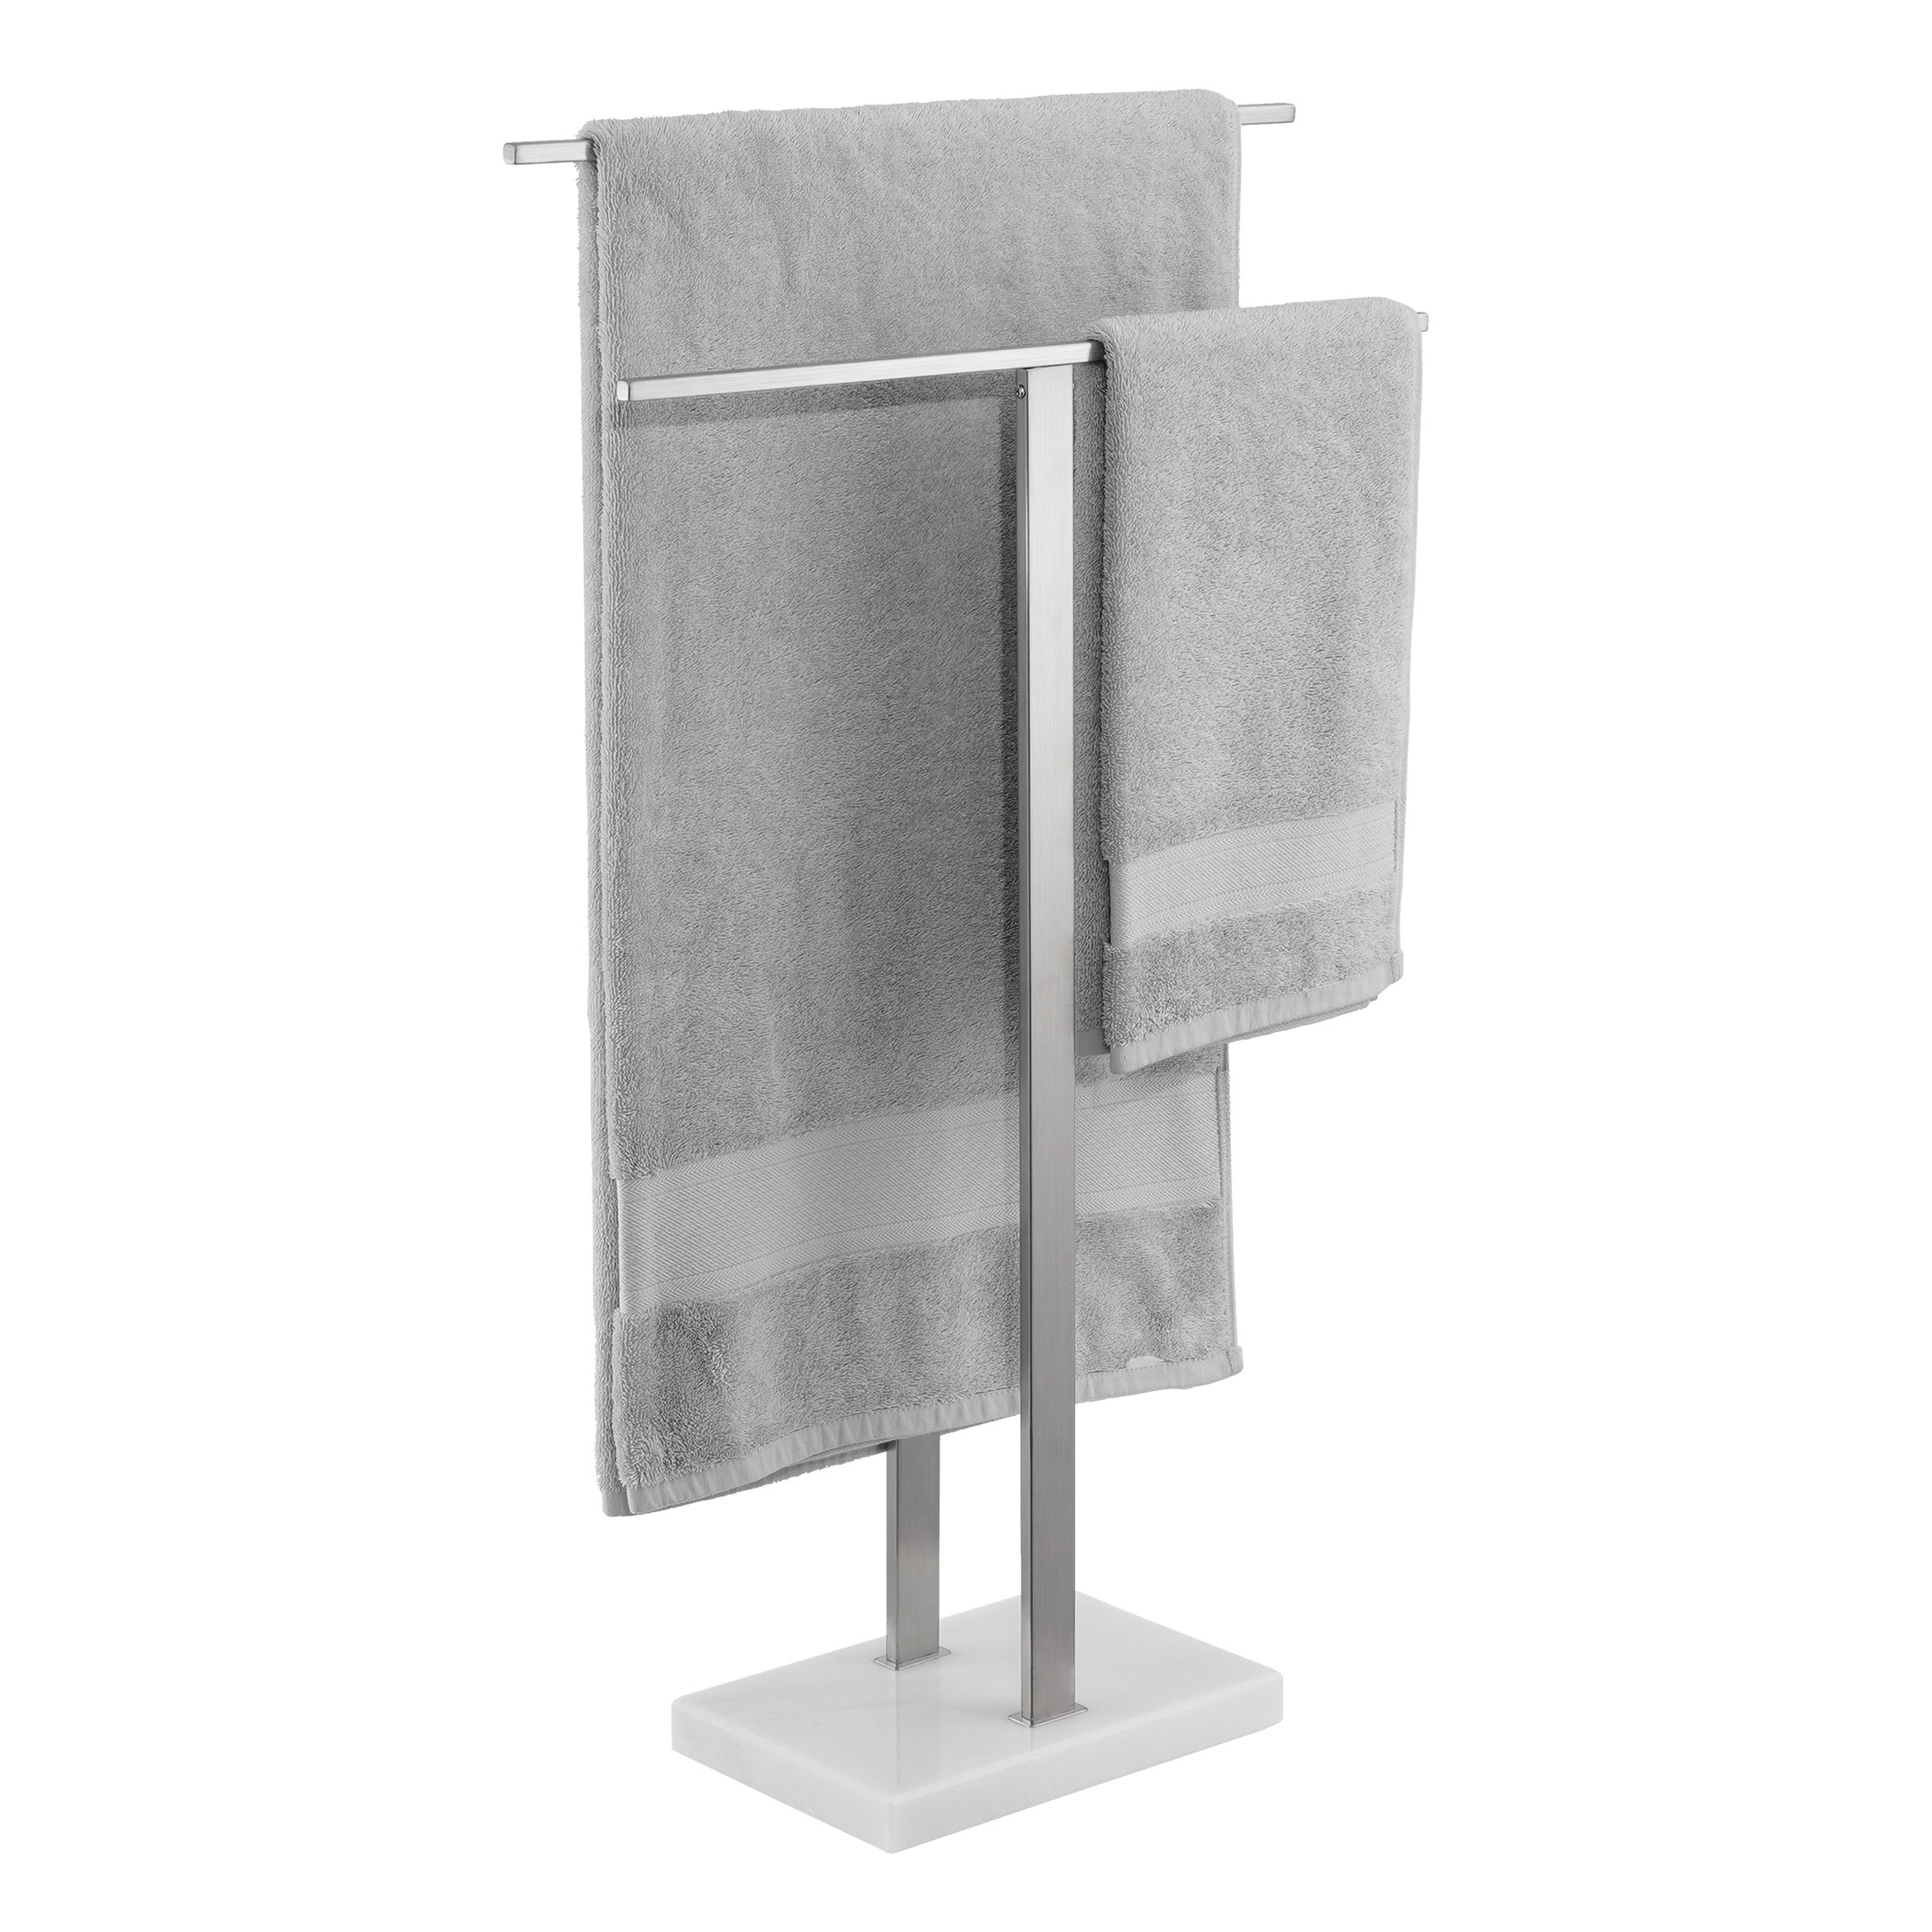 Standing Paper Towel Holder 304 Stainless Kitchen Countertop Bathroom  Standard or Jumbo-Sized Rolling Cleaning Tools